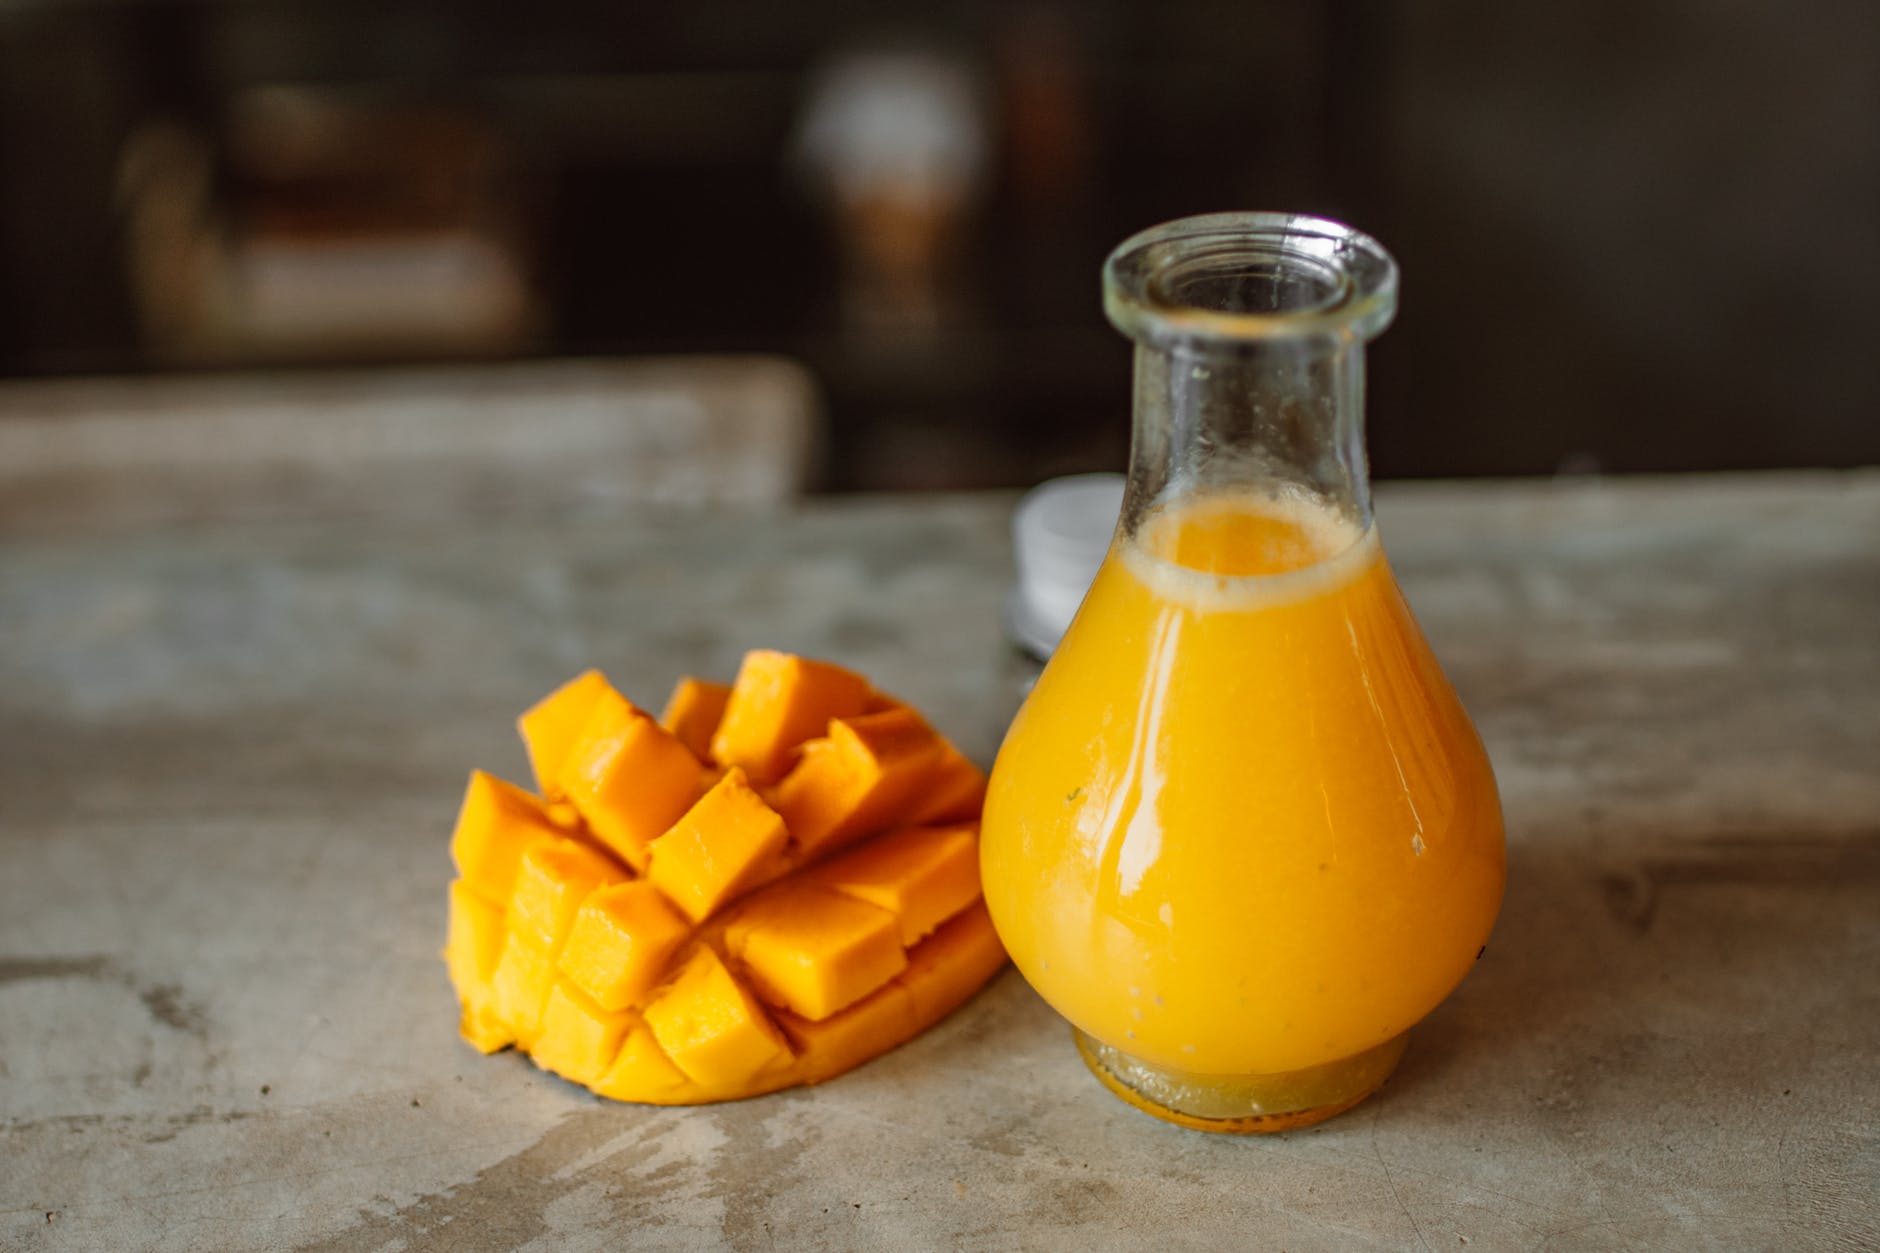 sliced mango beside a clear glass bottle with yellow liquid